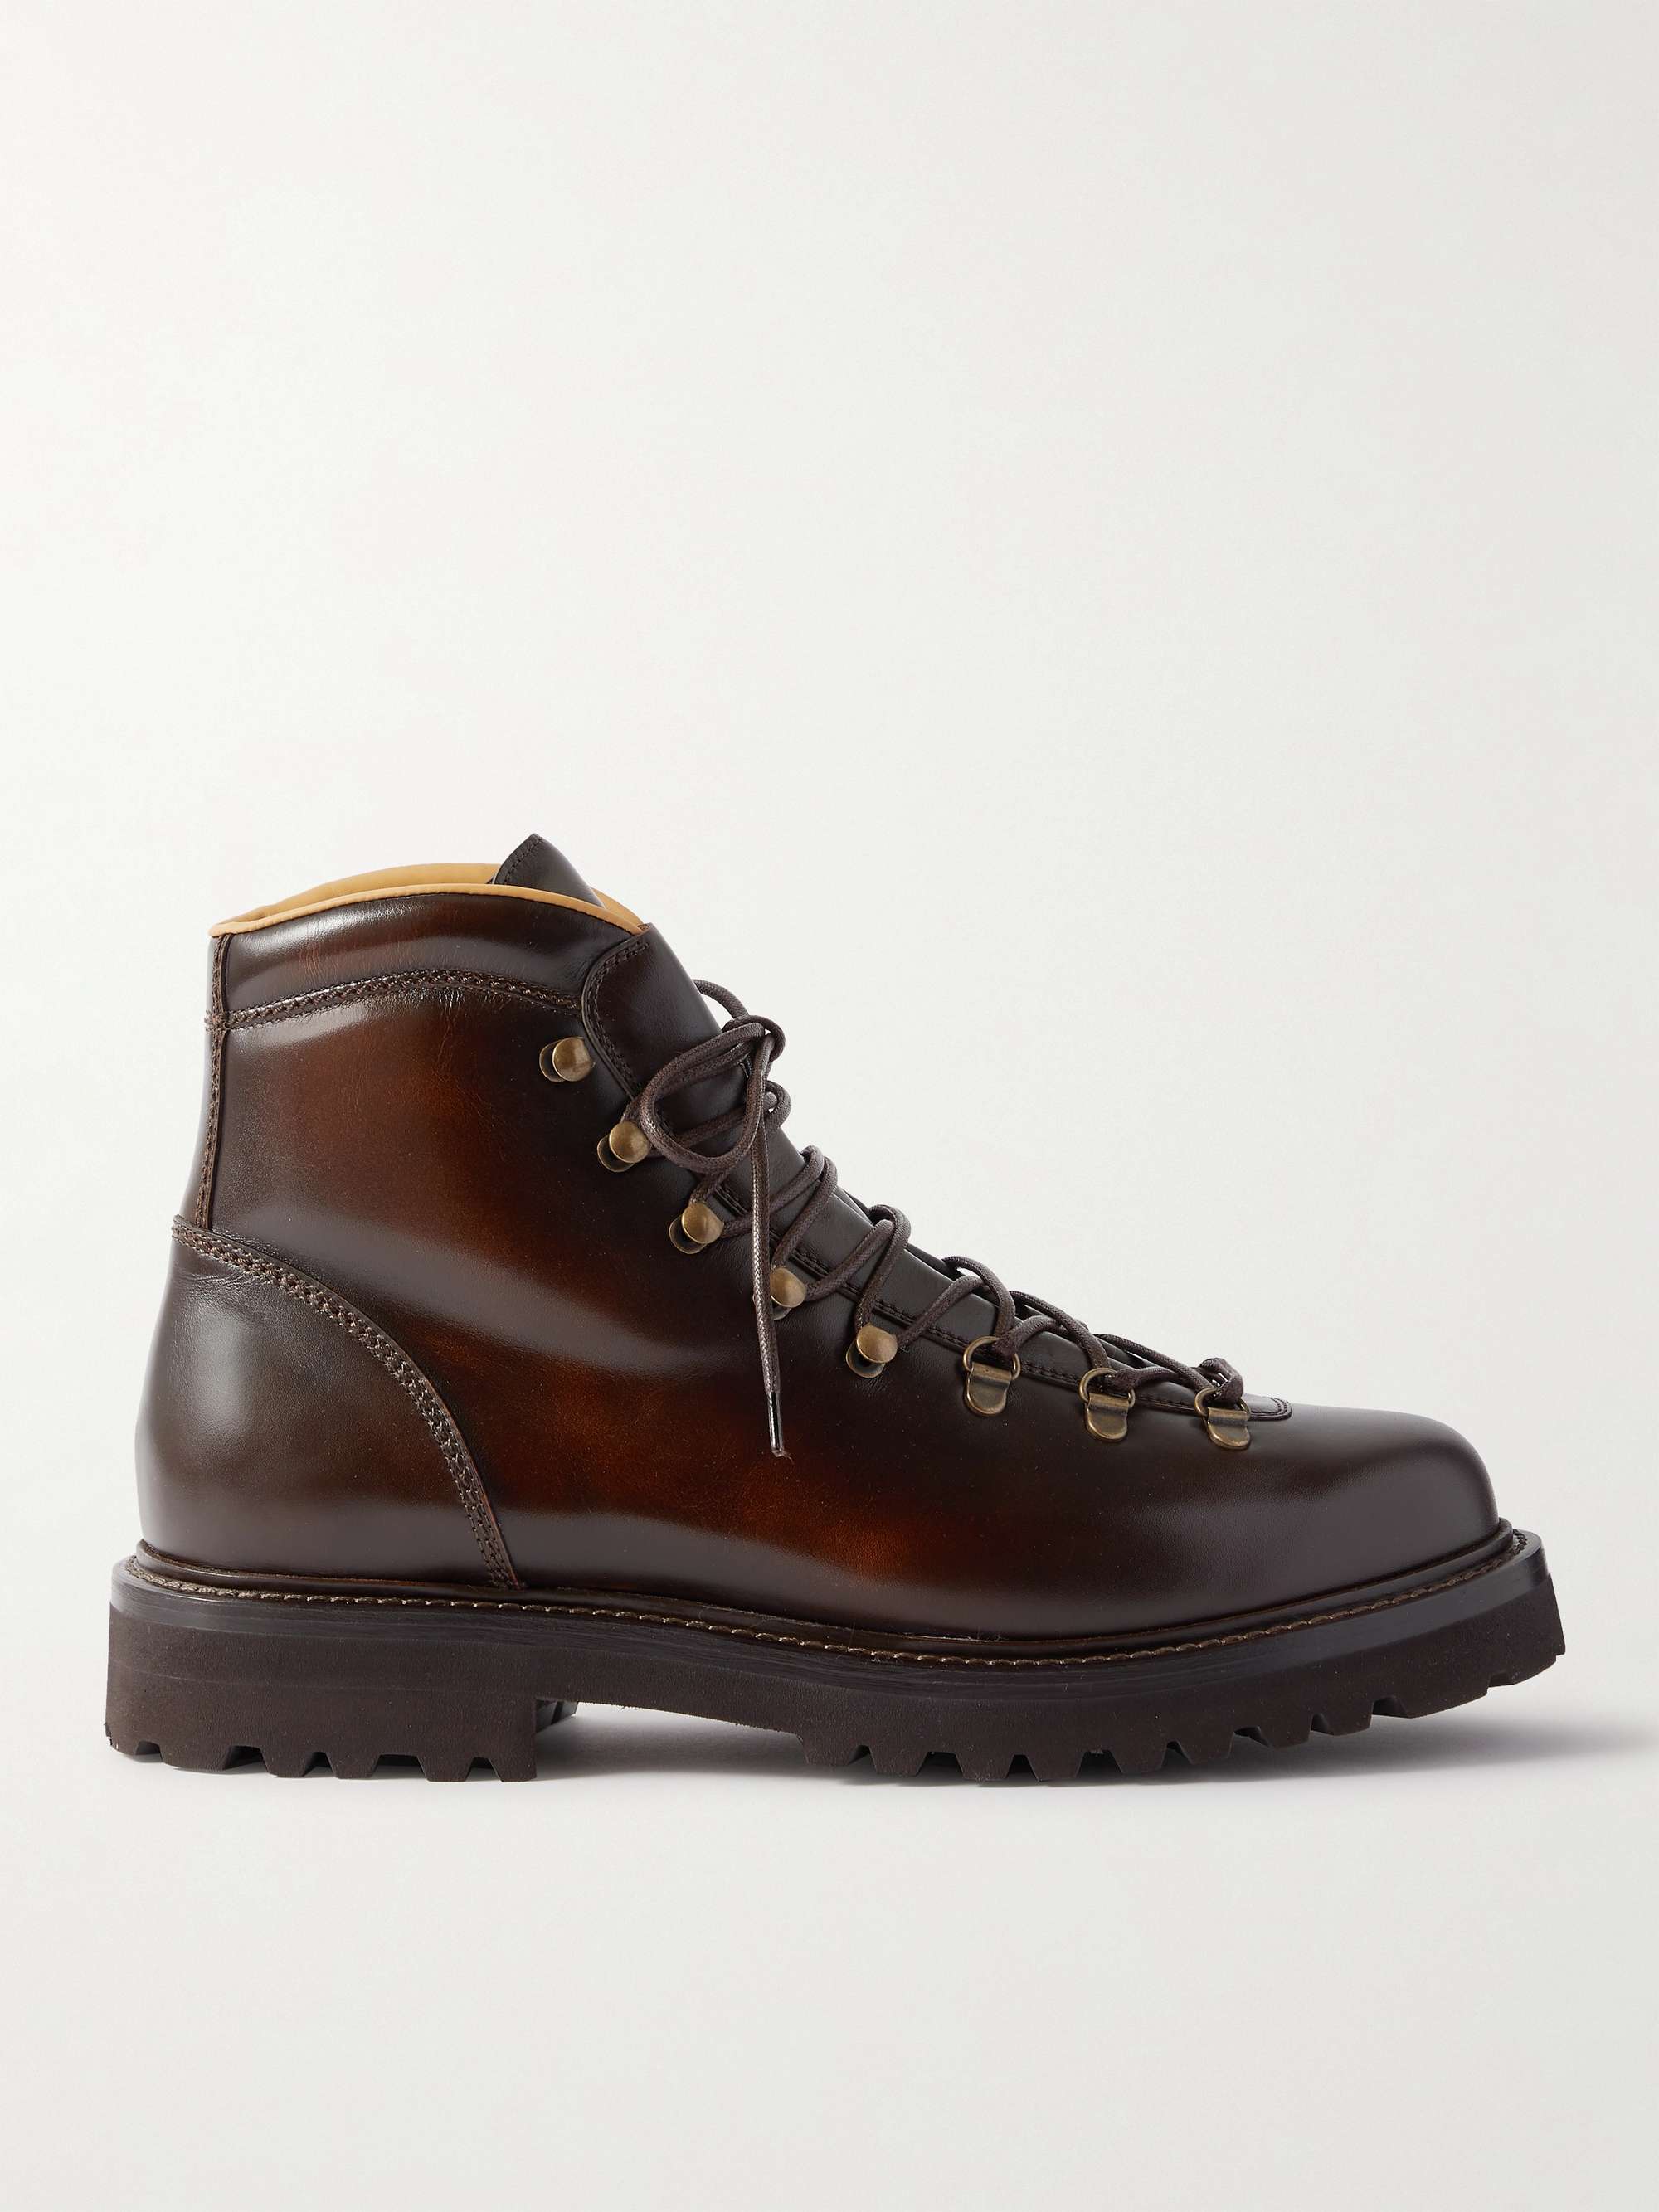 BRUNELLO CUCINELLI Leather Hiking Boots